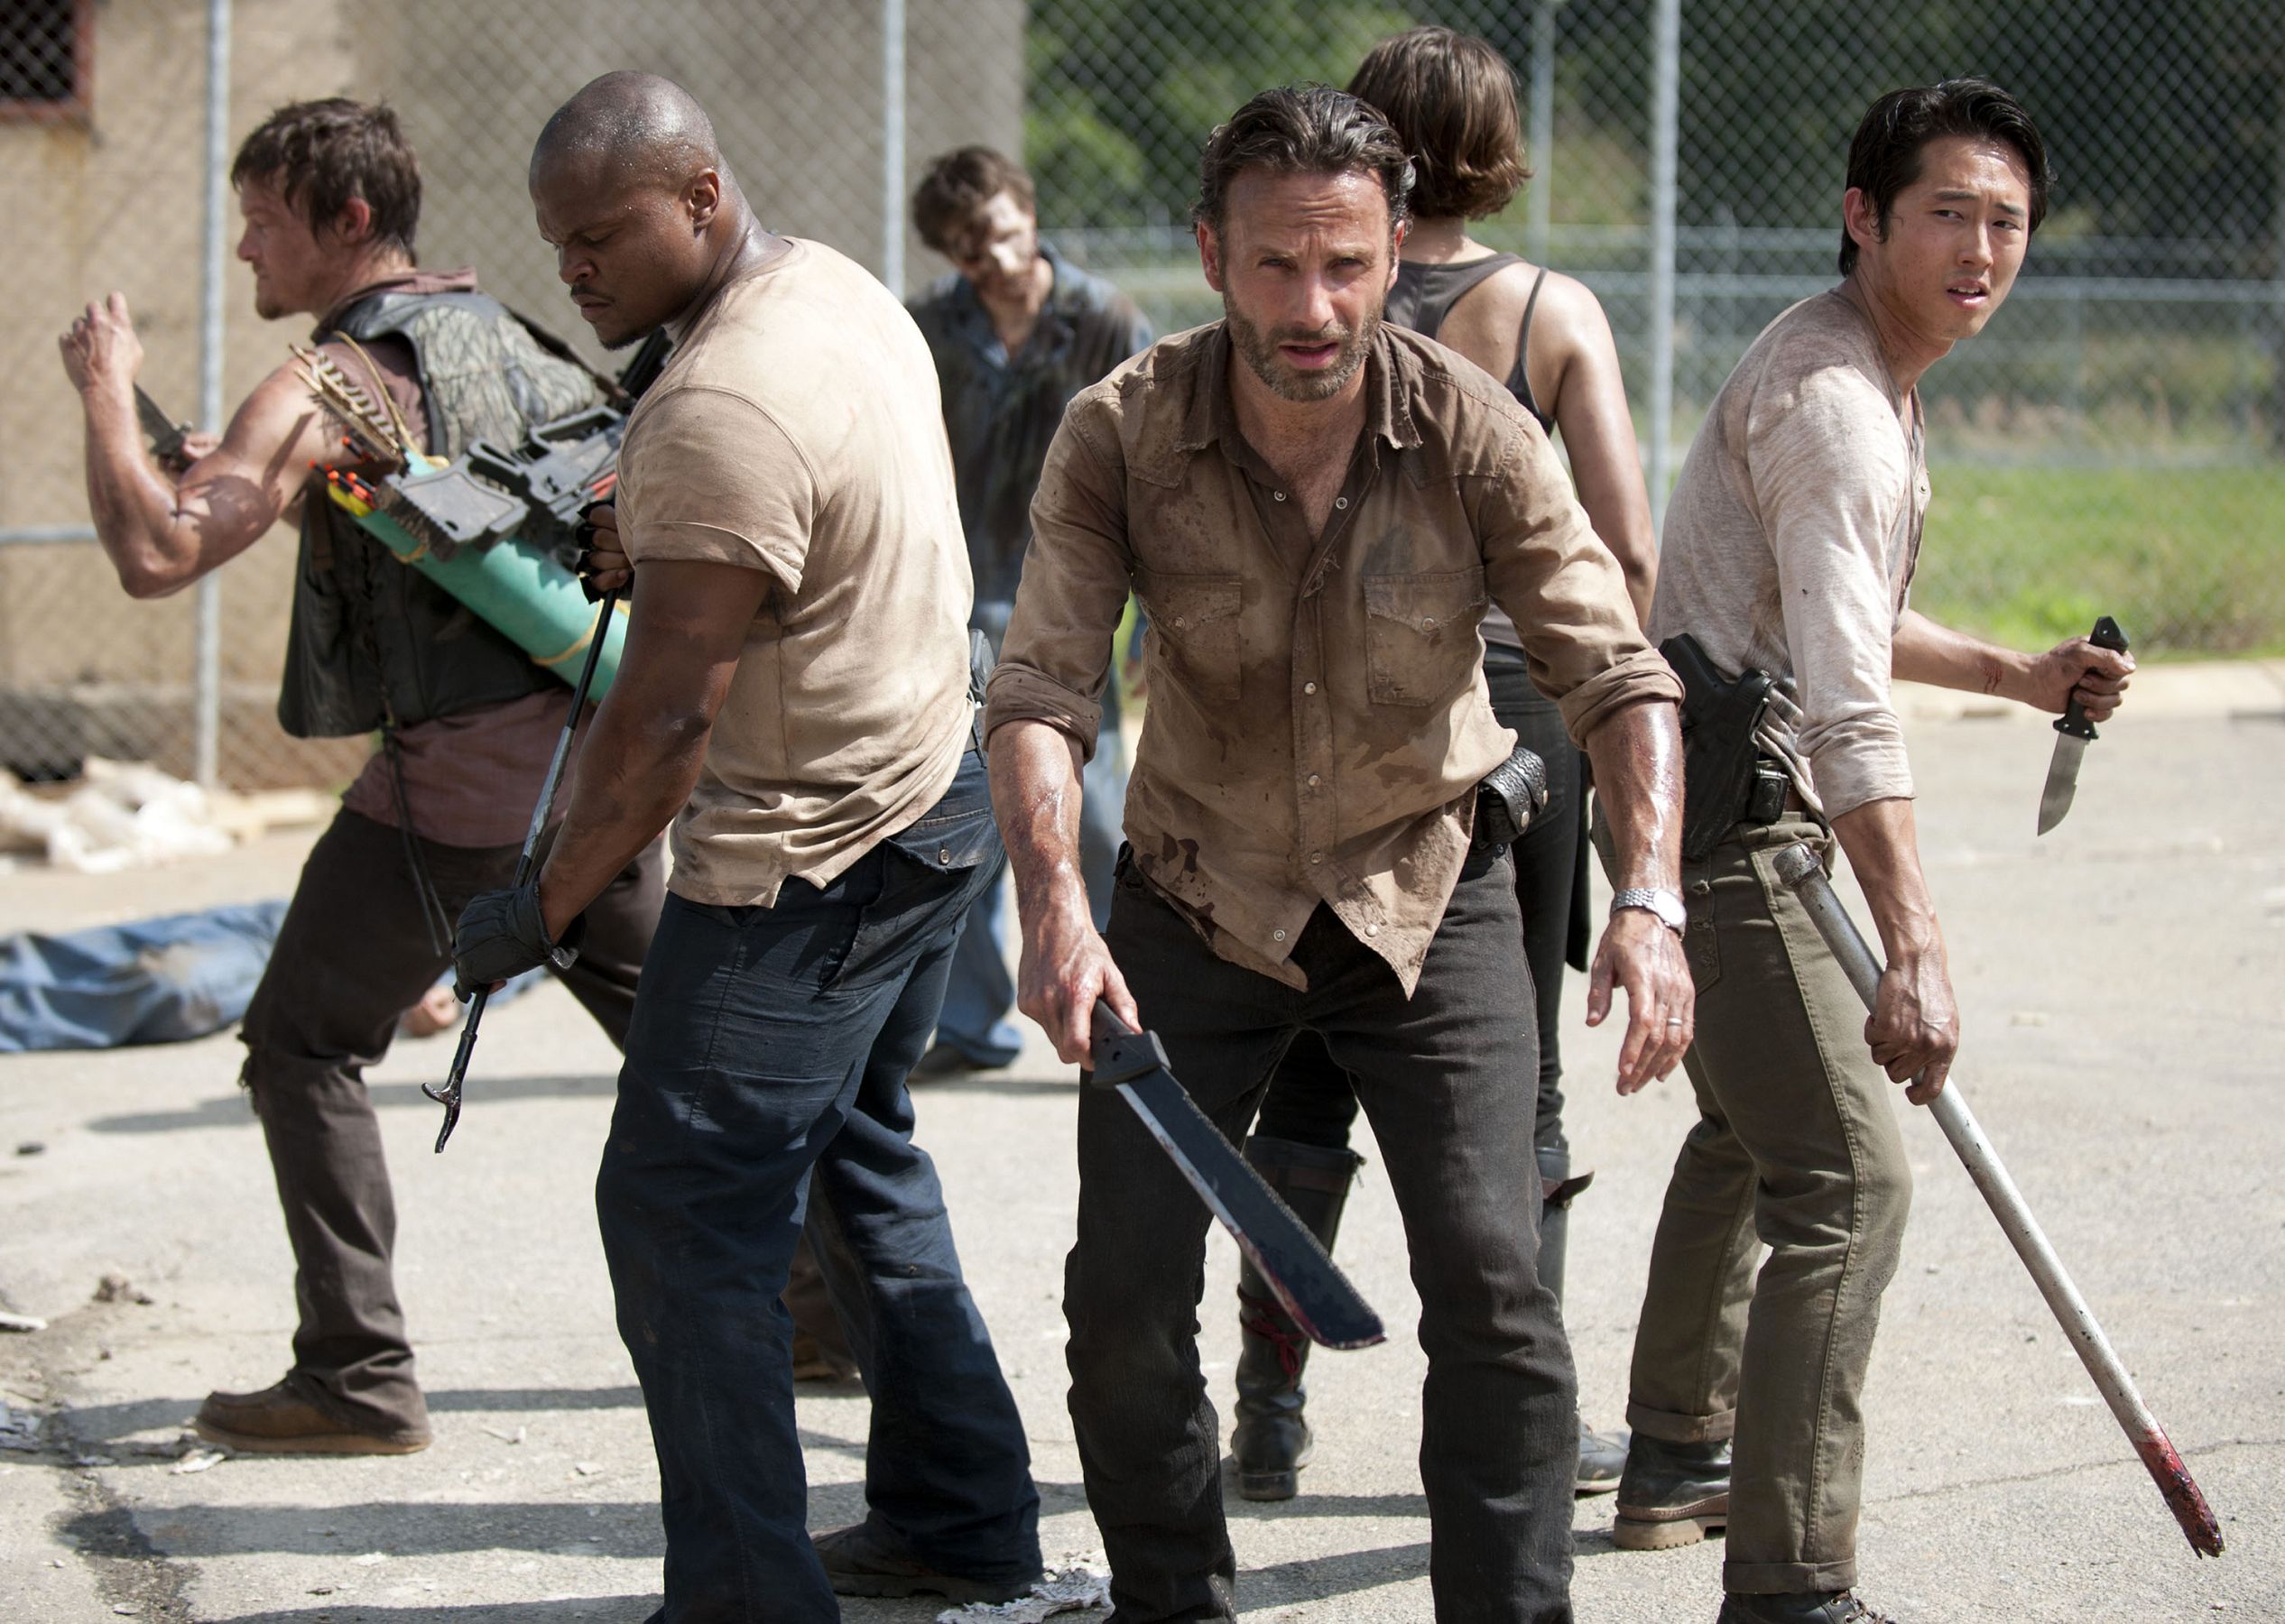 Facts about 'the walking dead'